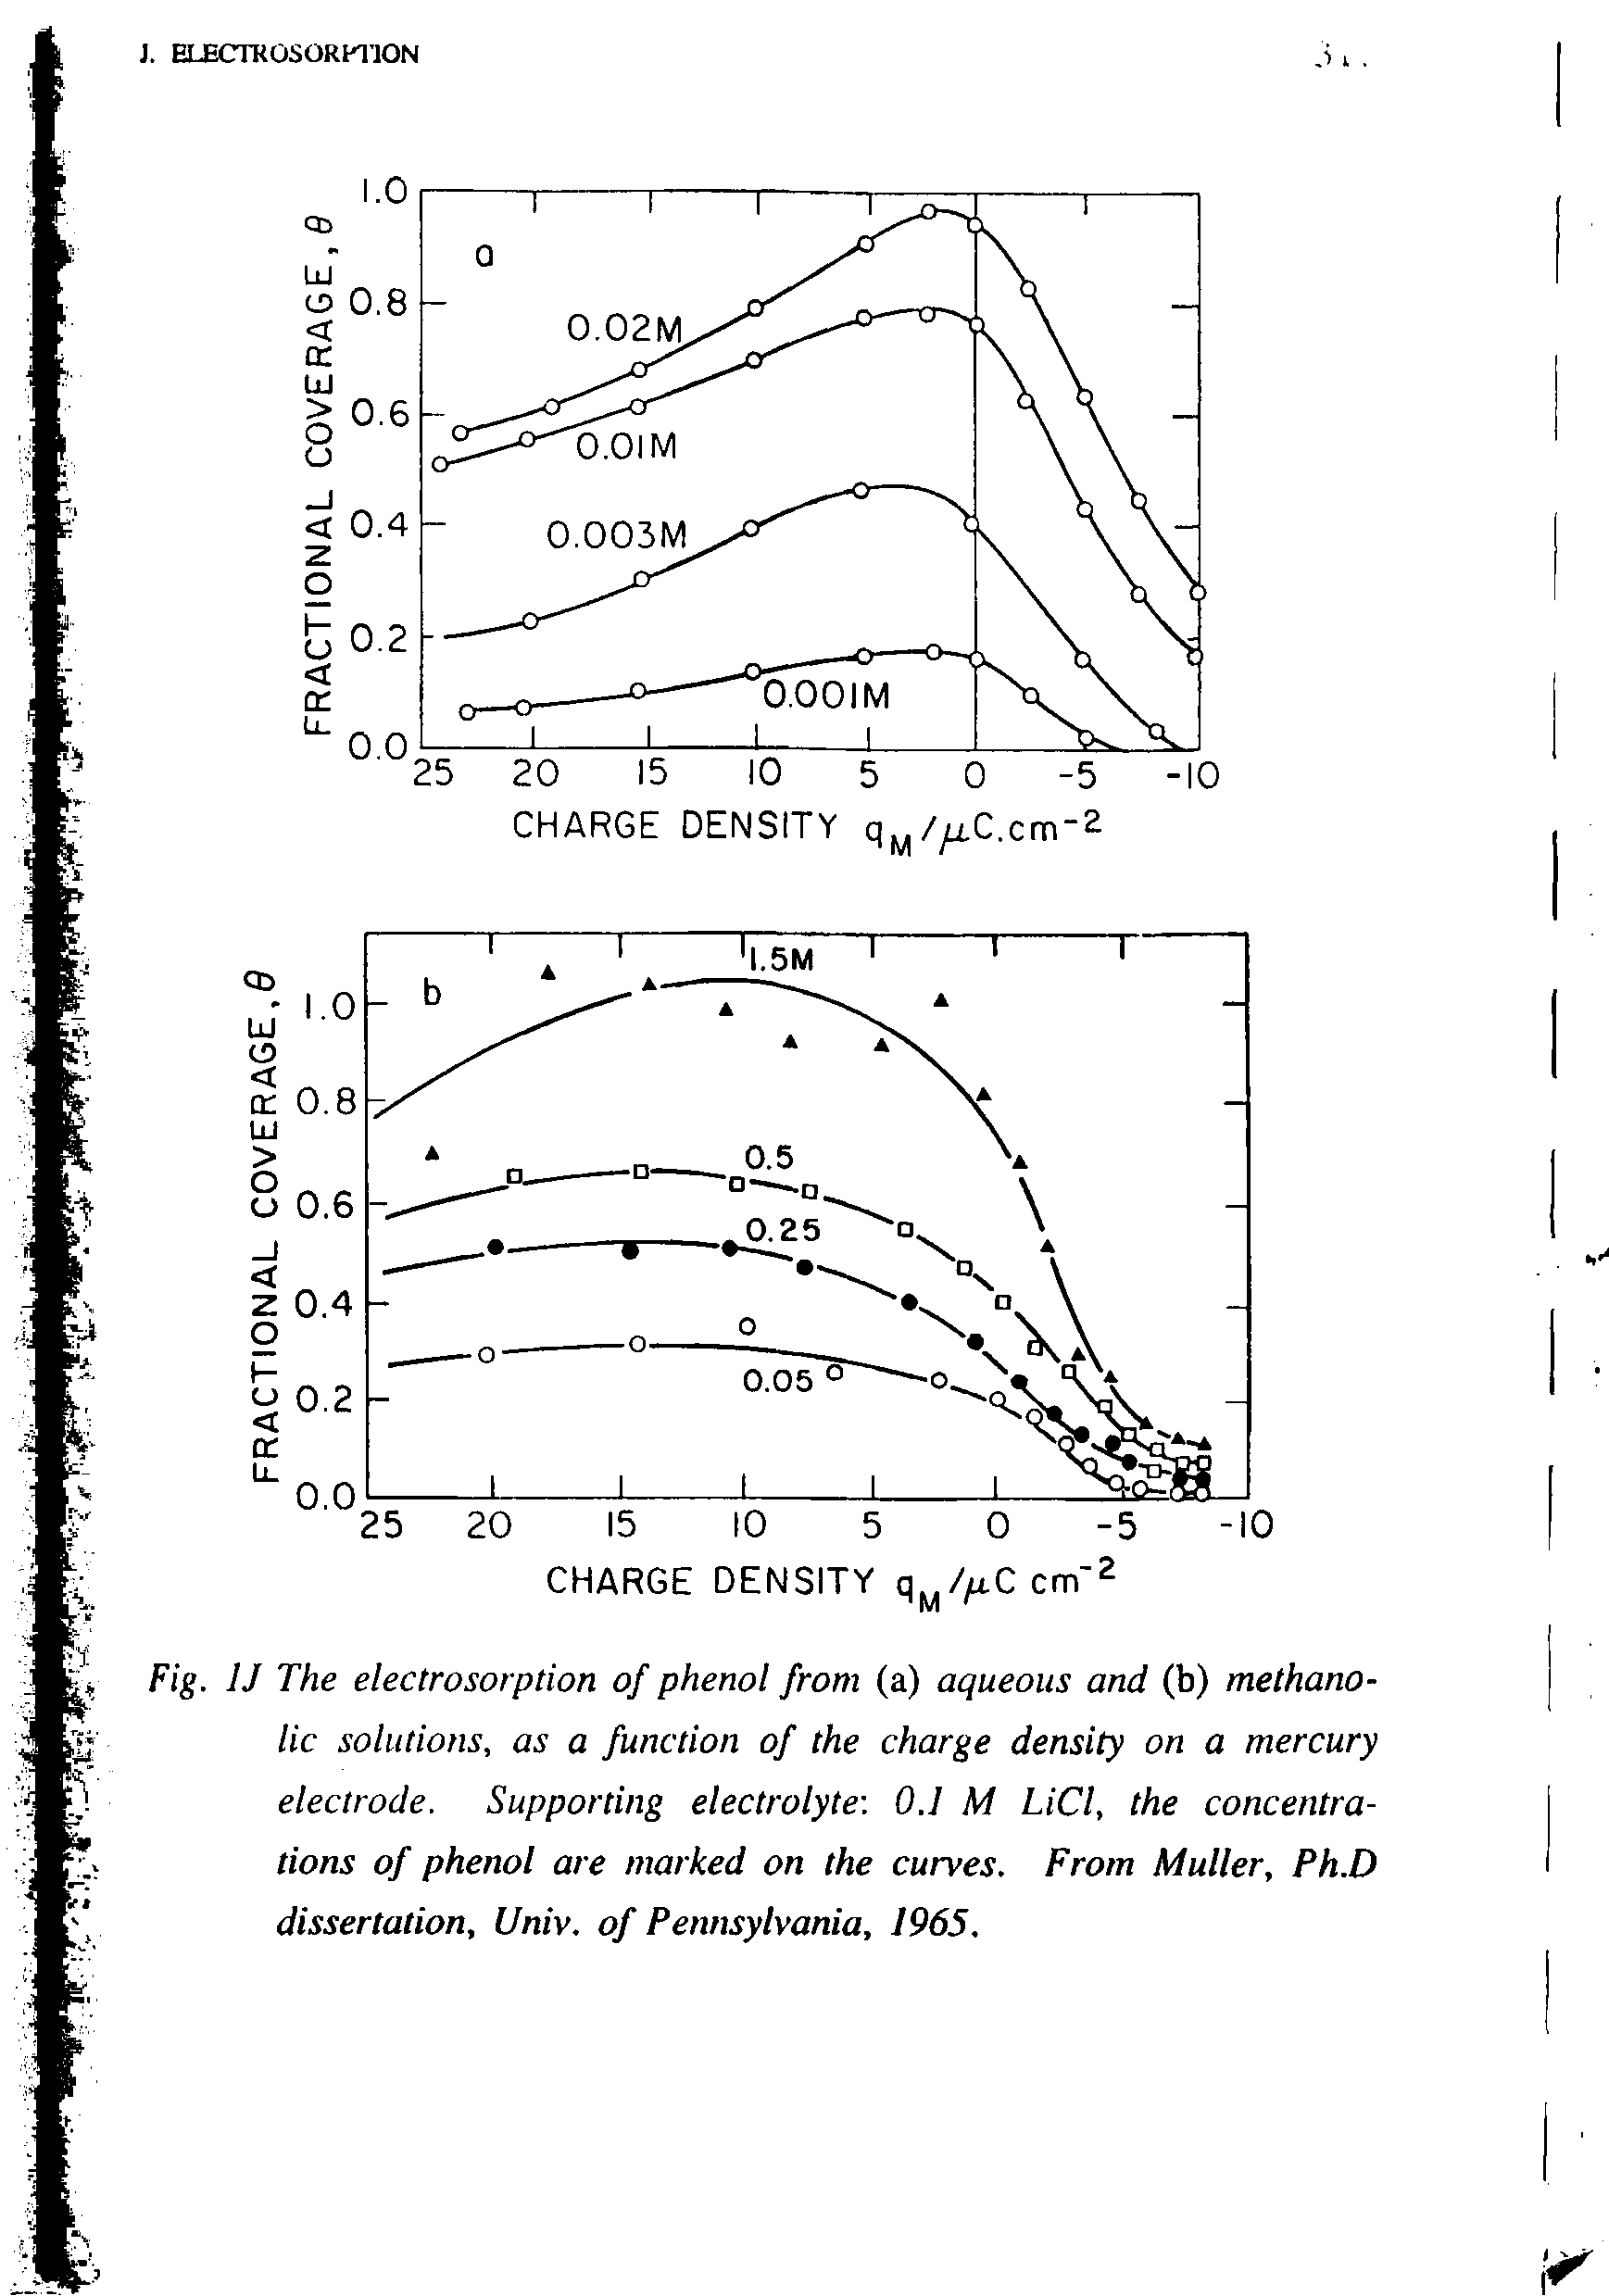 Fig. IJ The electrosorption of phenol from (a) aqueous and (b) methano-lic solutions, as a function of the charge density on a mercury electrode. Supporting electrolyte-. 0.] M LiCl, the concentrations of phenol are marked on the curves. From Muller, Ph.D dissertation, Univ. of Pennsylvania, 1965.